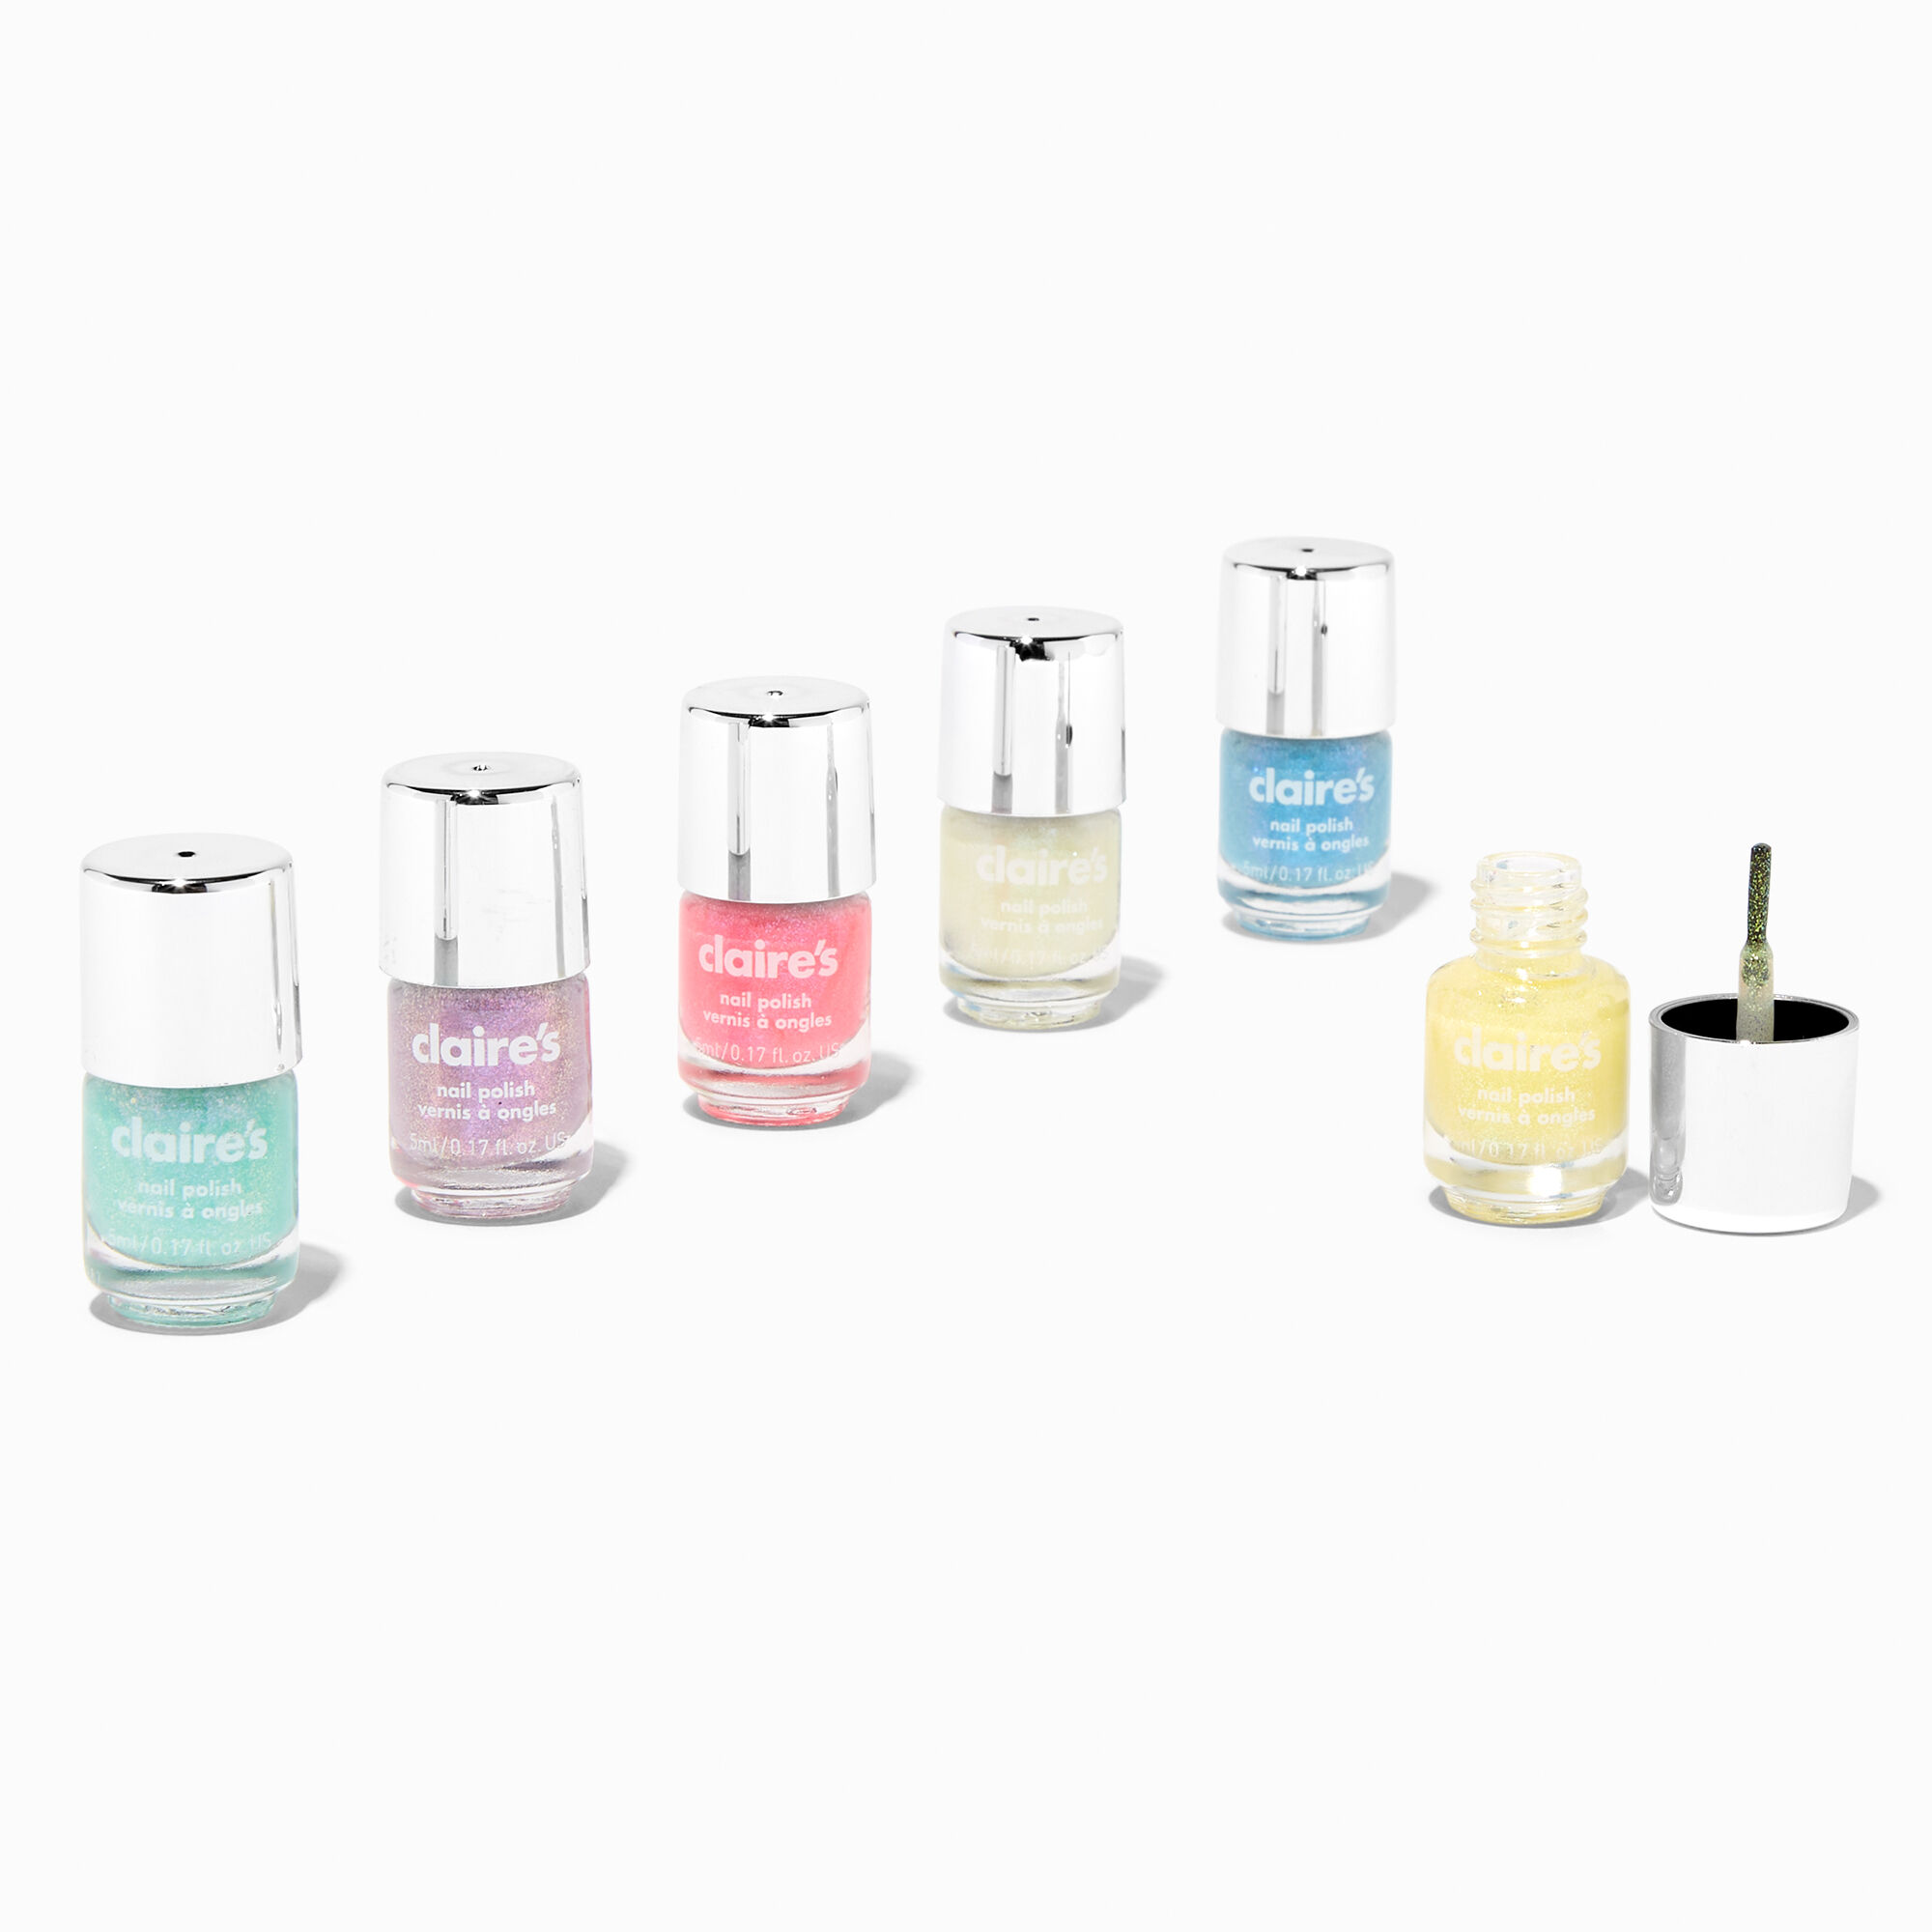 View Claires Glitter Glow In The Dark Mini Nail Polish 6 Pack information